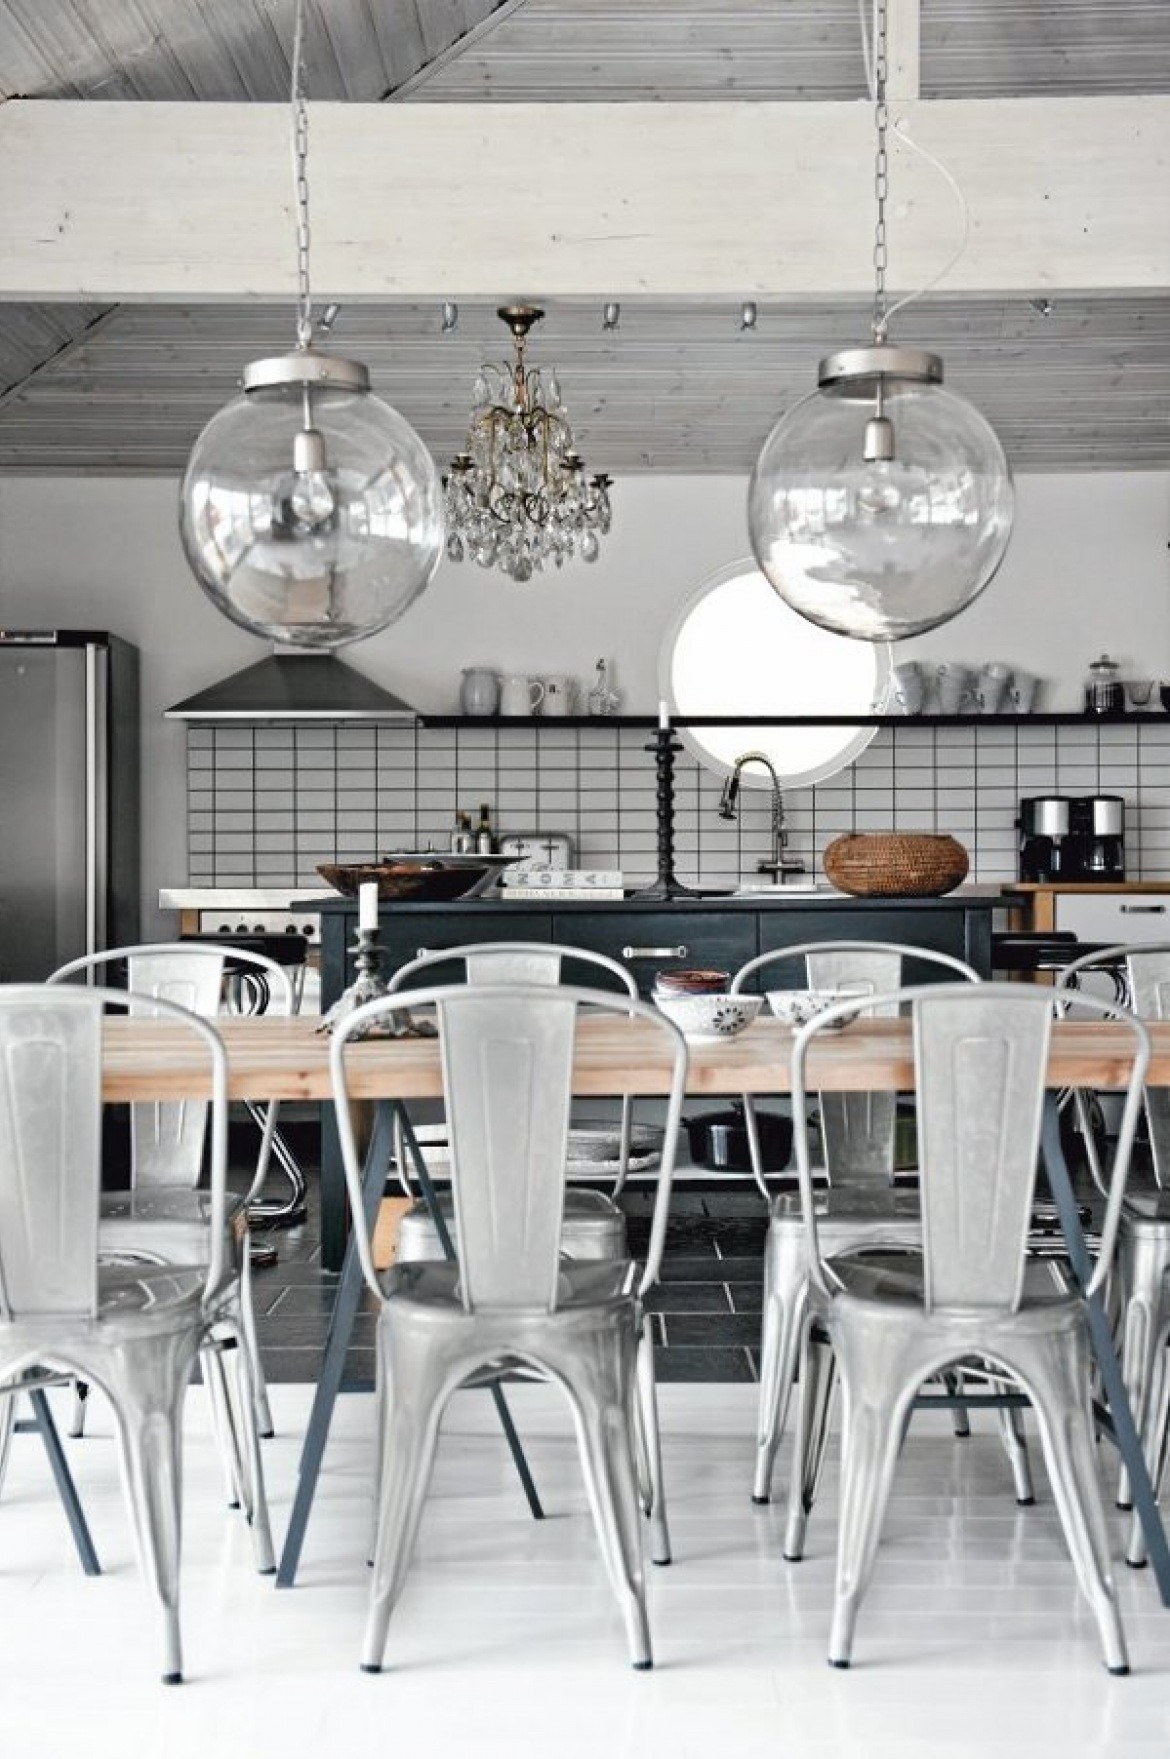 Industrial kitchen tolix chairs and large globe pendants